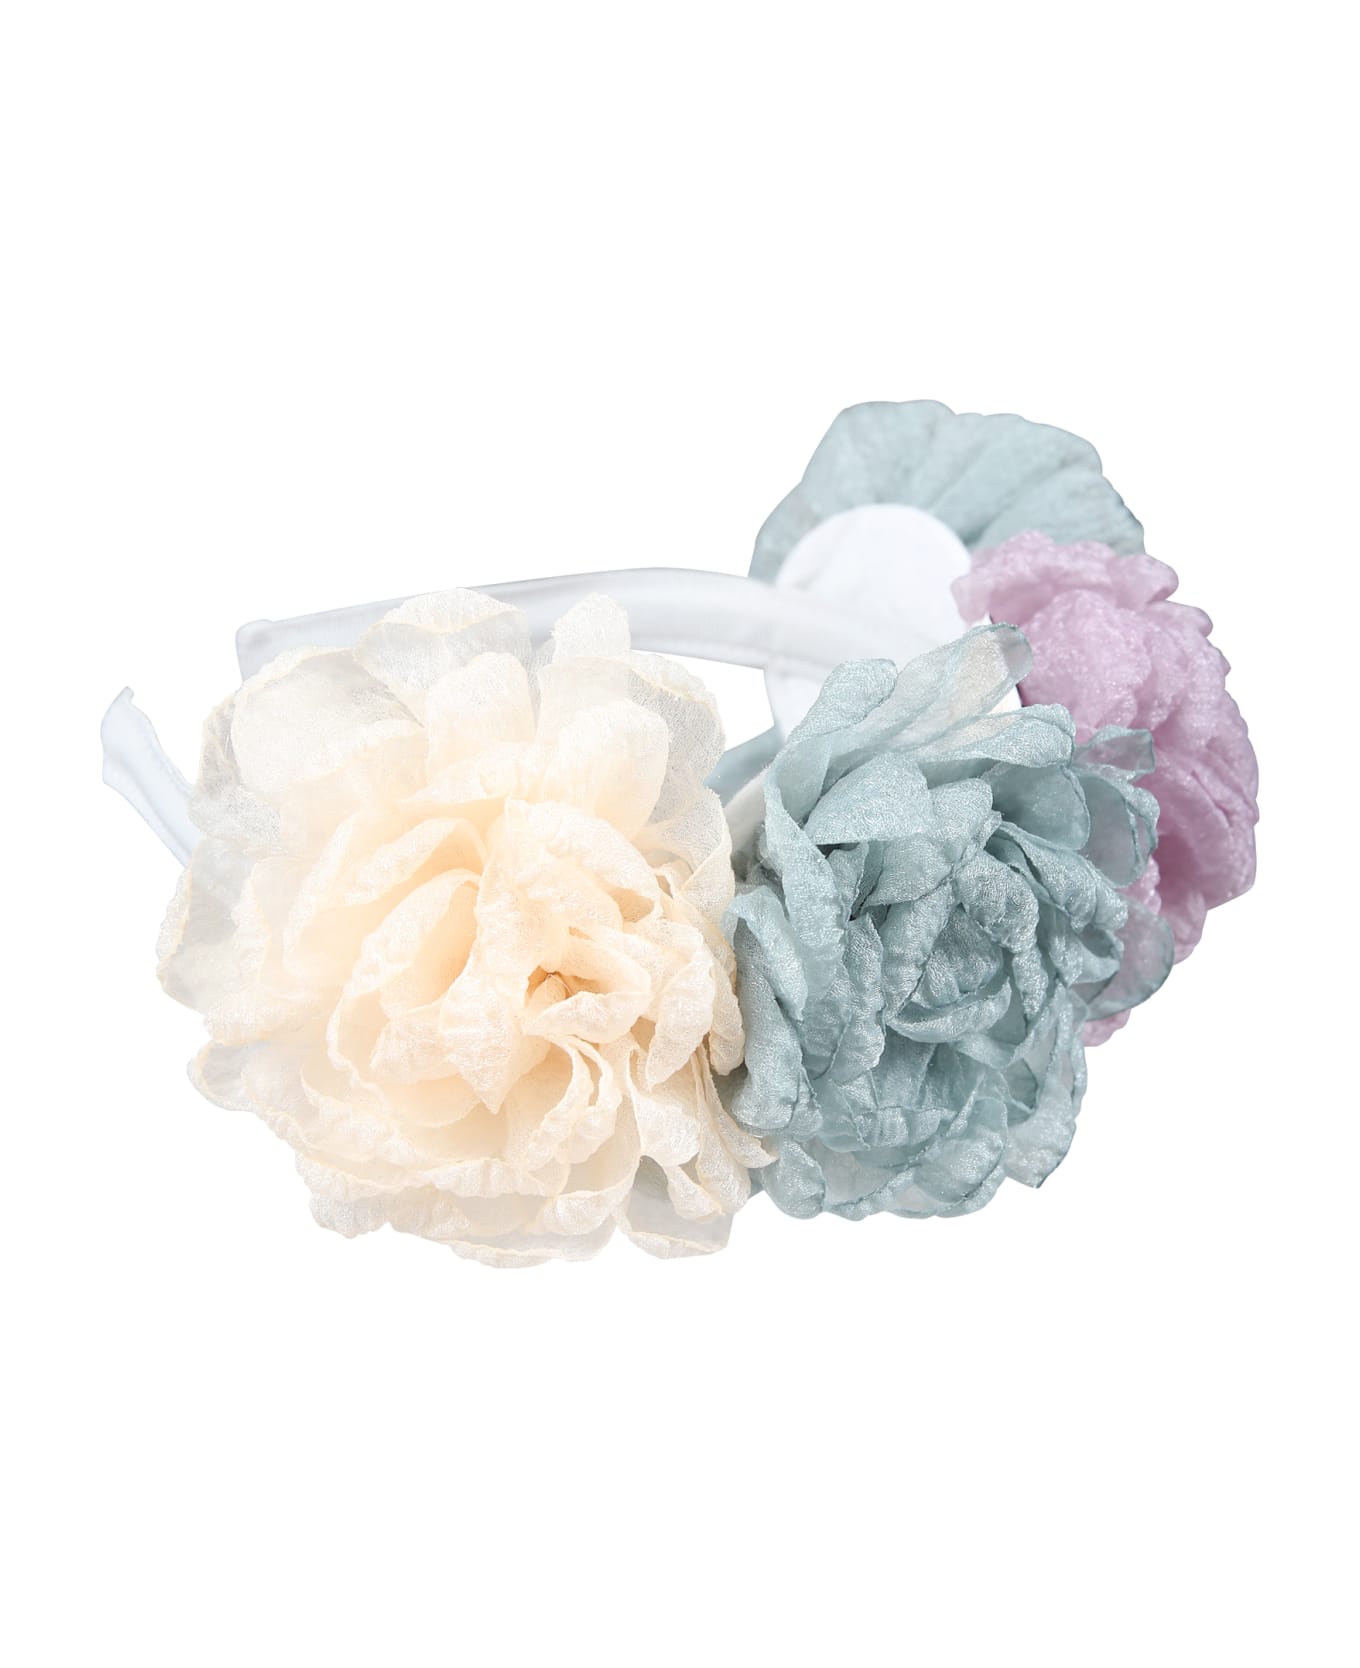 Caffe' d'Orzo Multicolor Headband For Girl With Roses - Multicolor アクセサリー＆ギフト